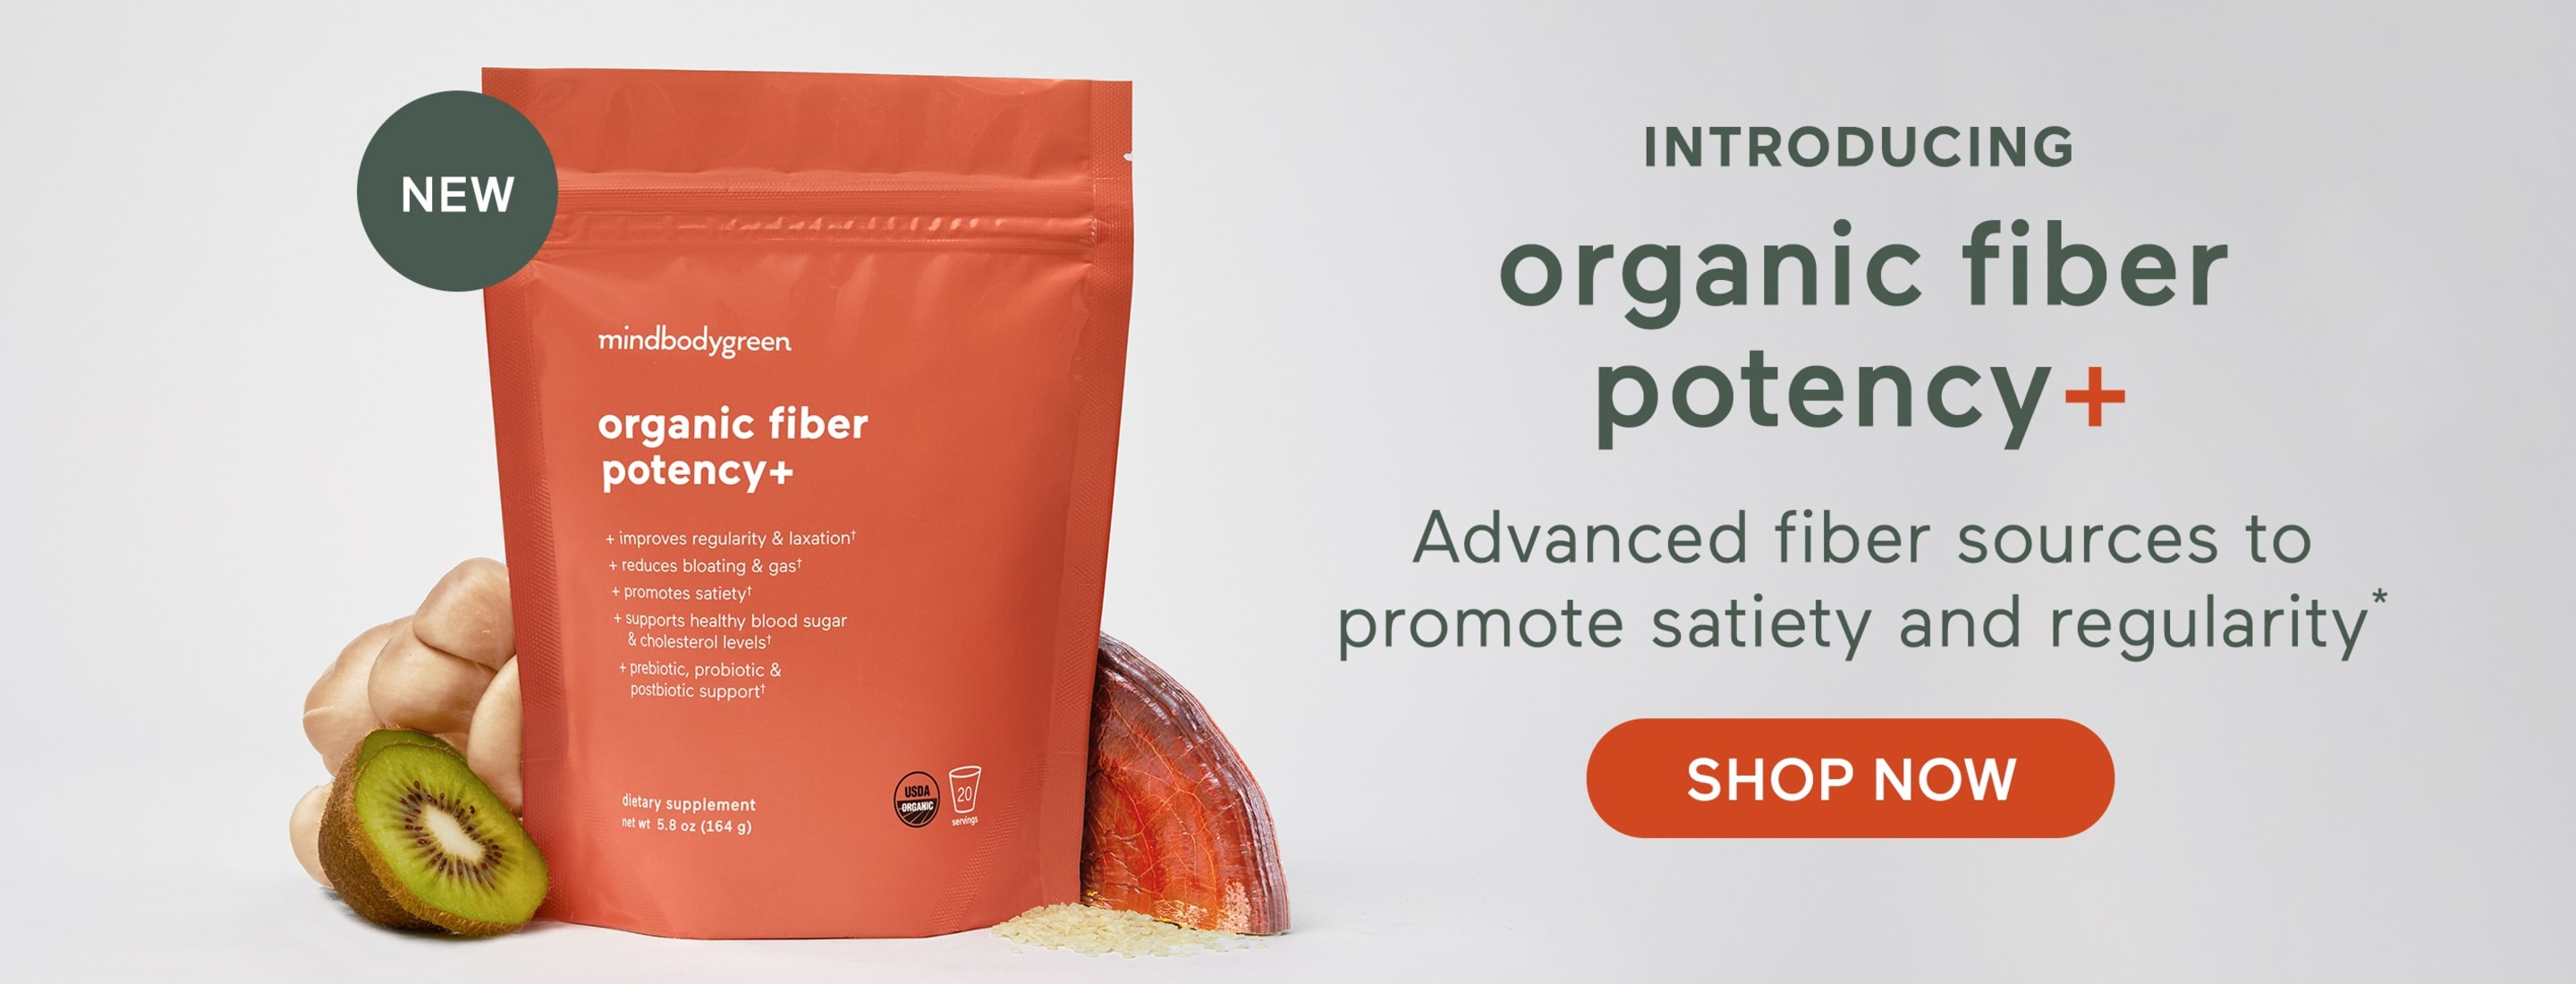 NEW introducing organic fiber potency+ Advanced fiber sources to promote satiety and regularity* SHOP NOW